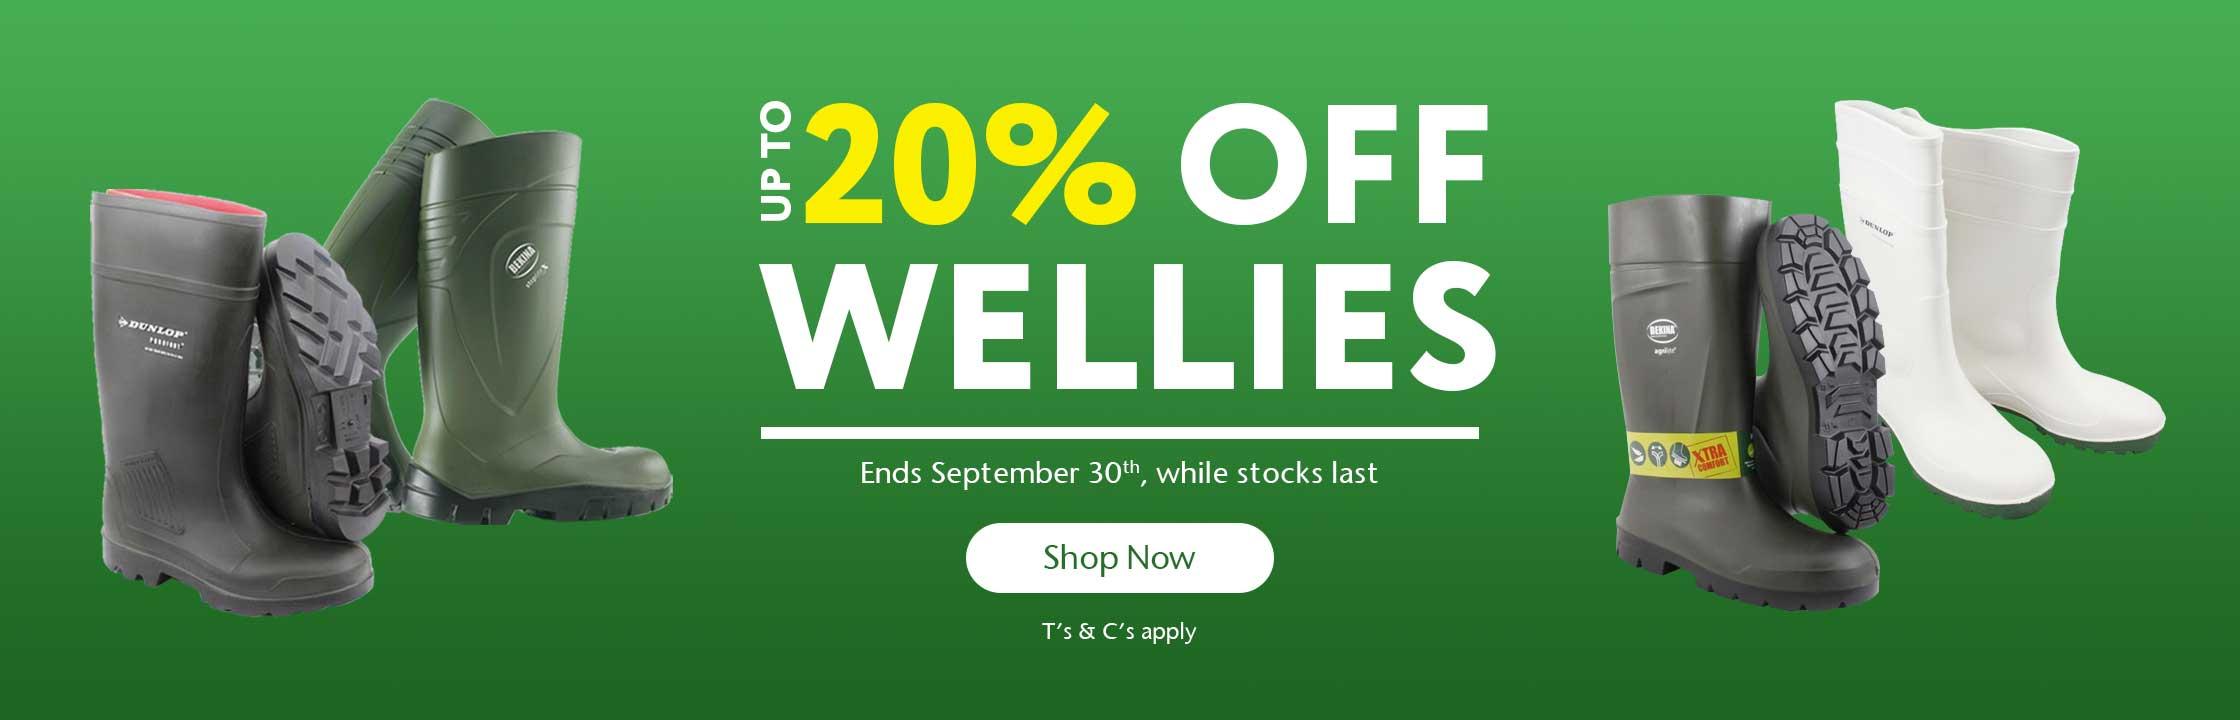 September Offers Up To 20% OFF Wellies